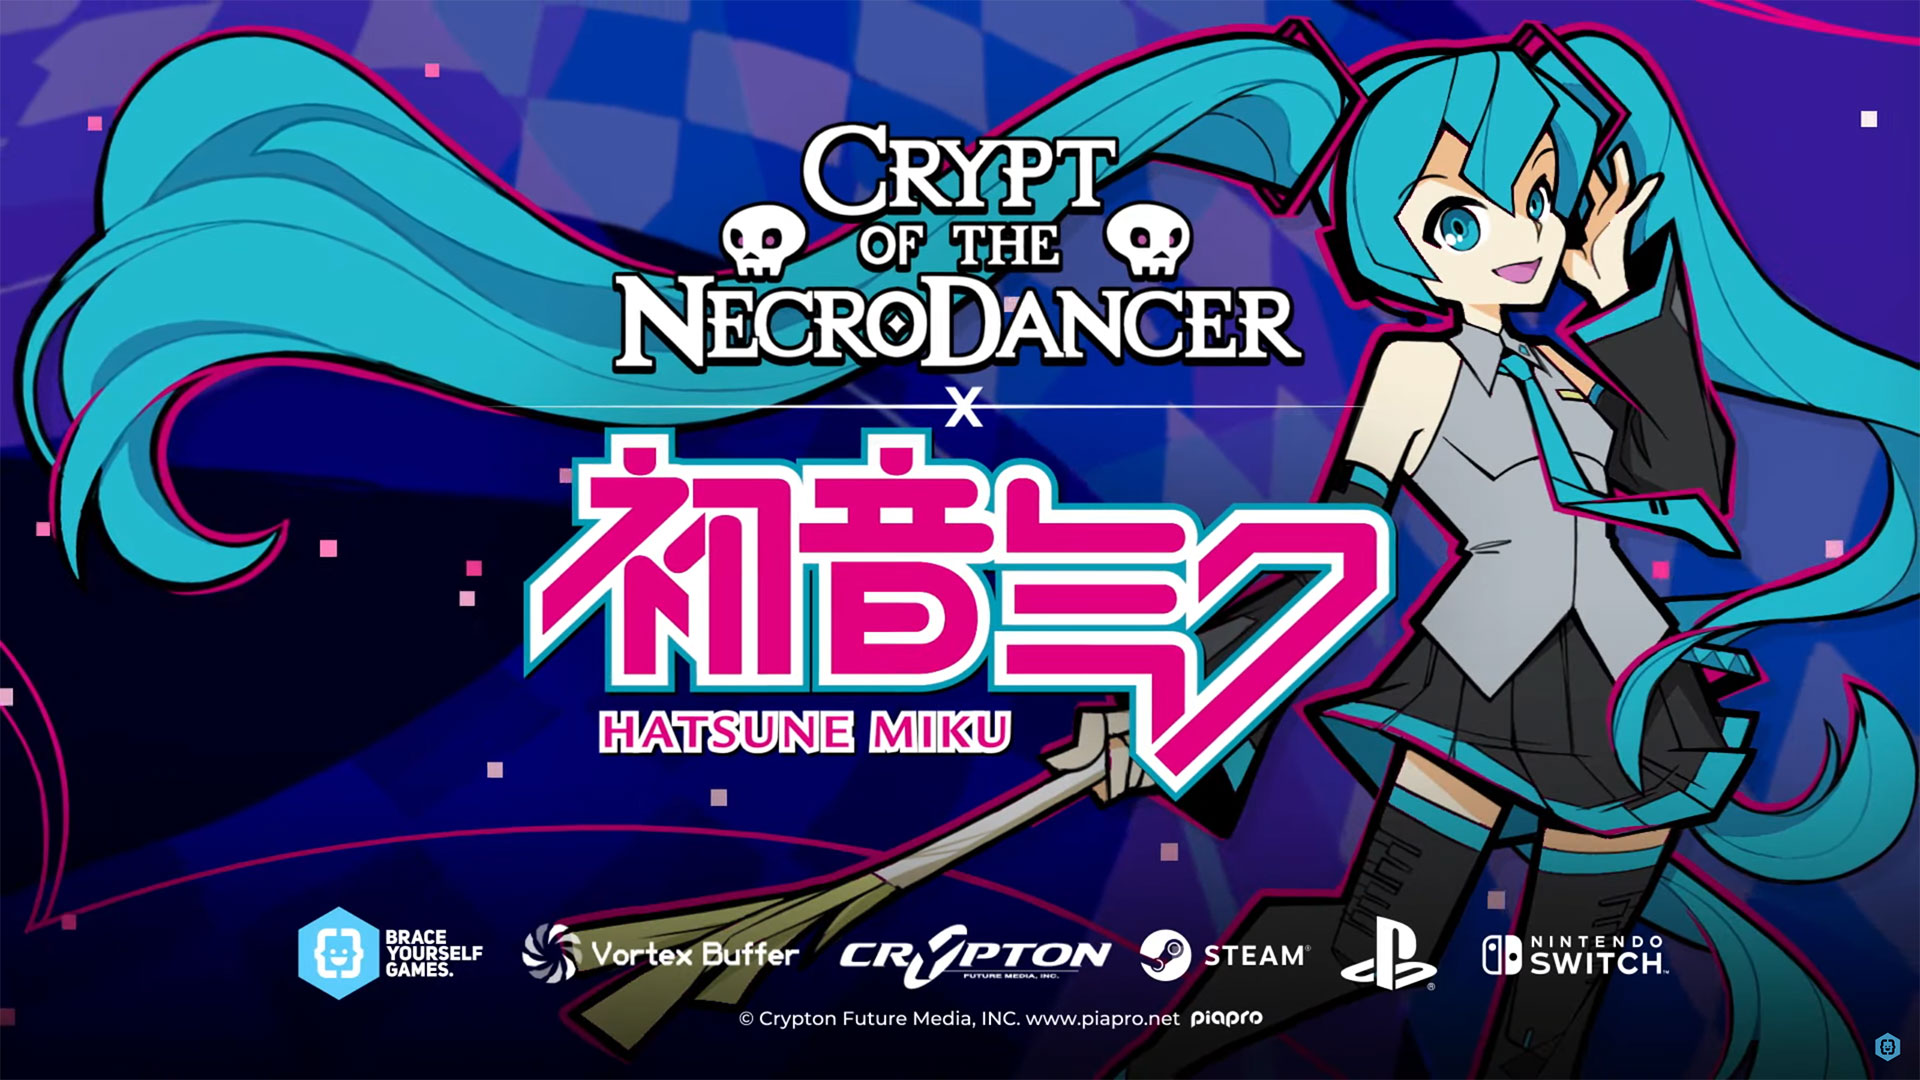 Hatsune Miku is joining Crypt of the NecroDancer as character DLC